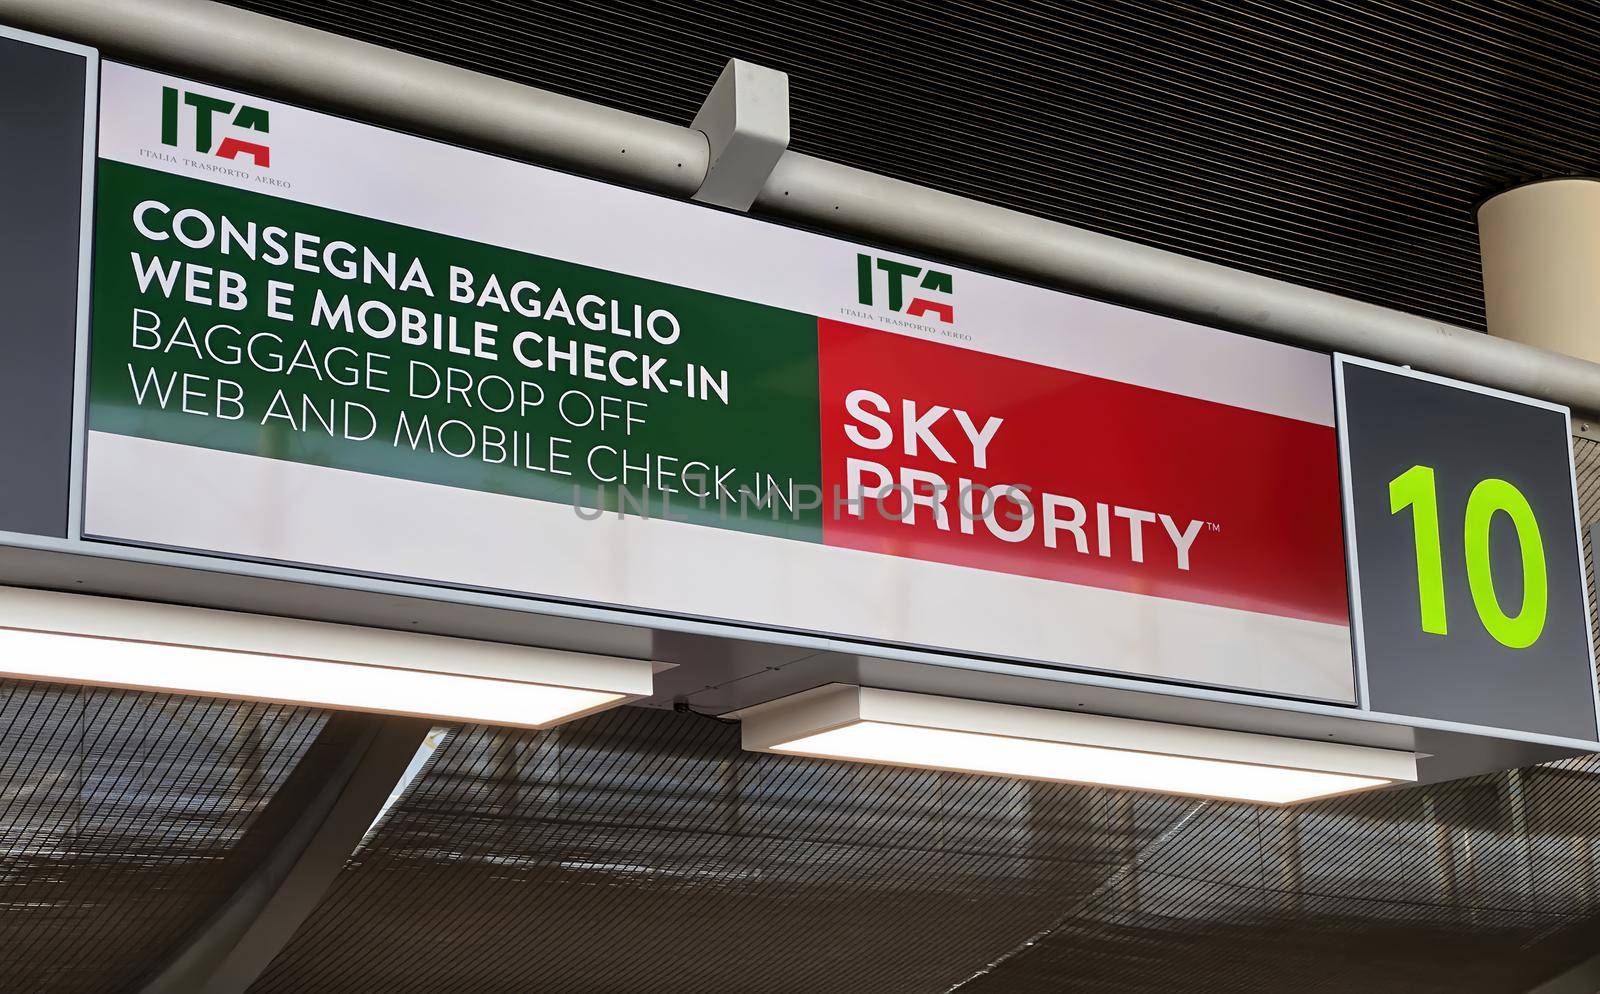 Catania, Italy, August 2021: Information panel of the ITA desk inside the Catania airport. Luggage drop off and check in. ITA is the new Italian flag carrier starting from 15 October 2021